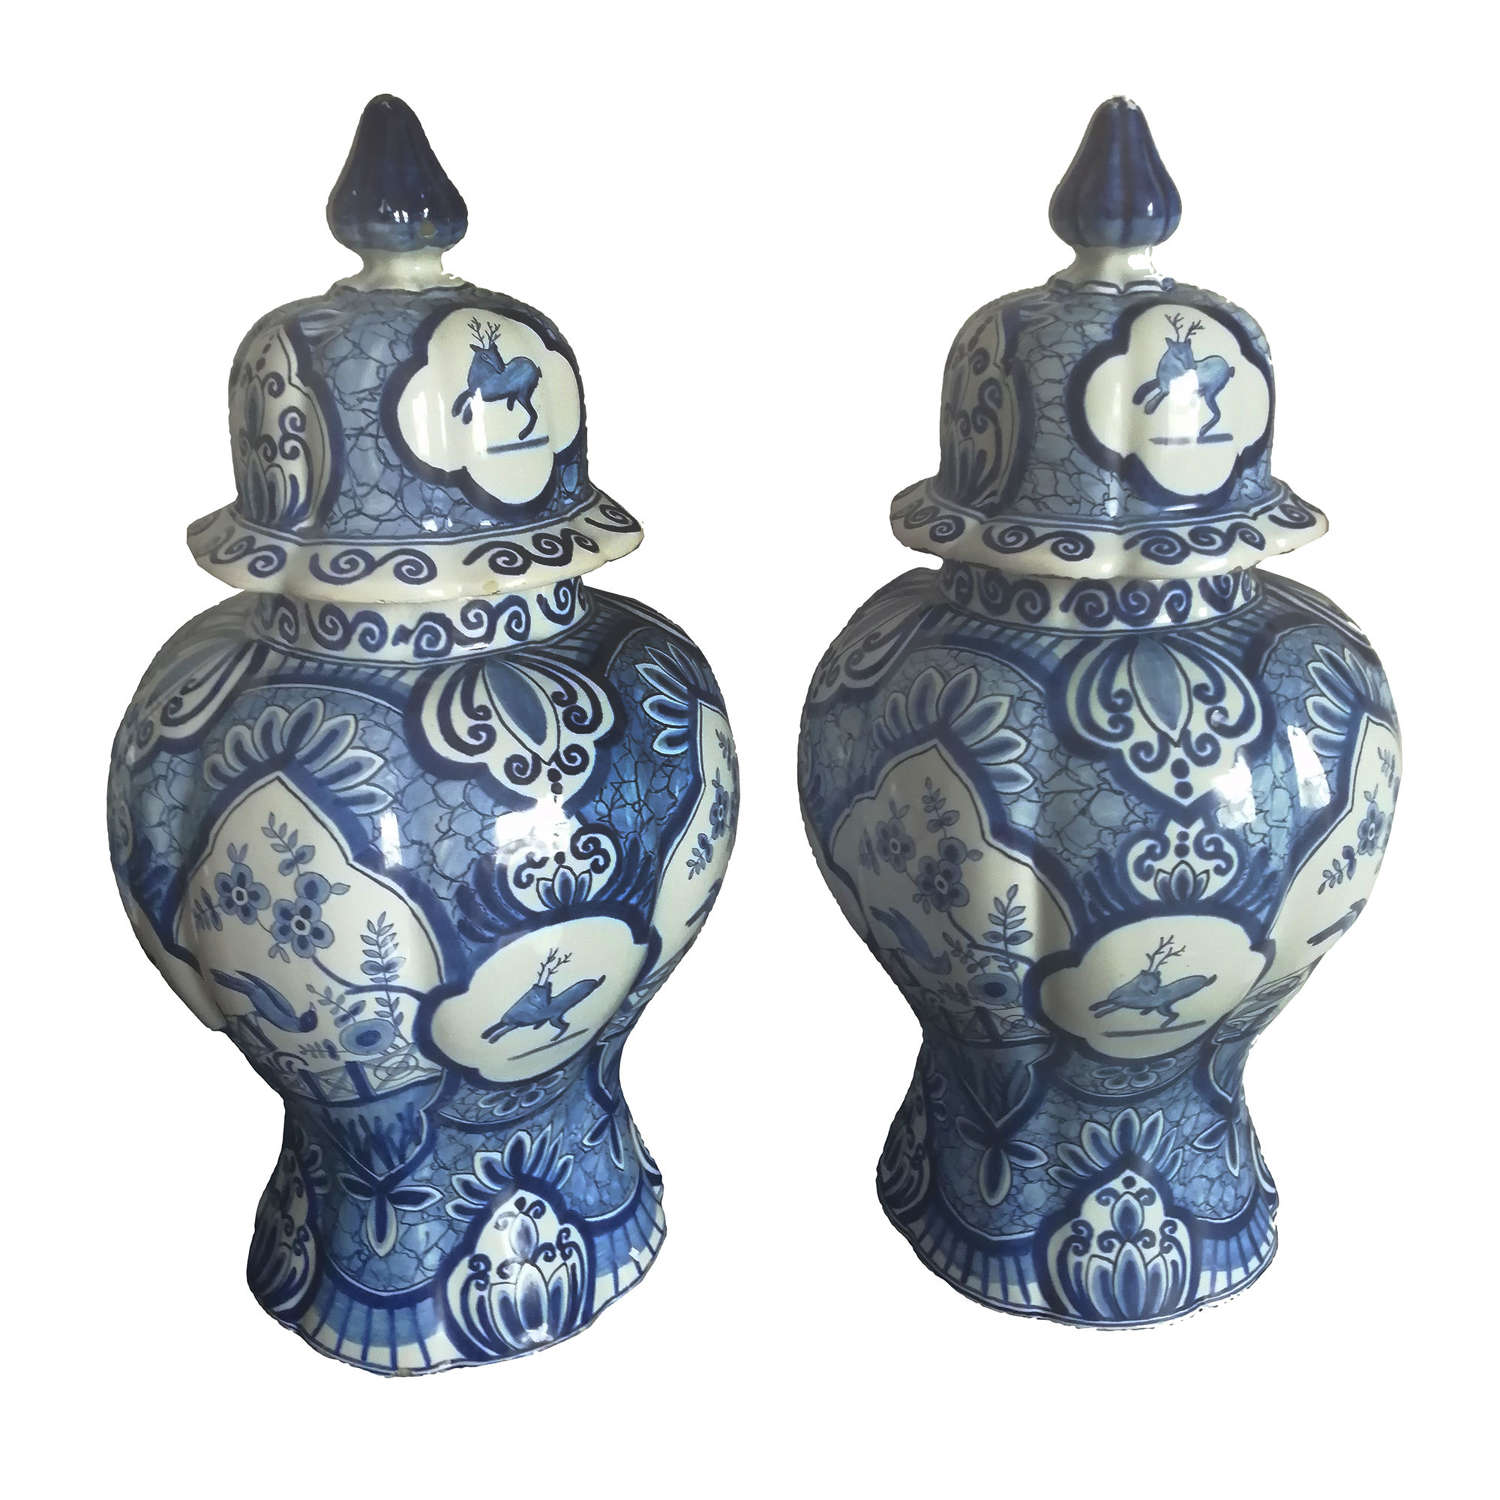 A fine quality pair of Dutch Delft vases & covers